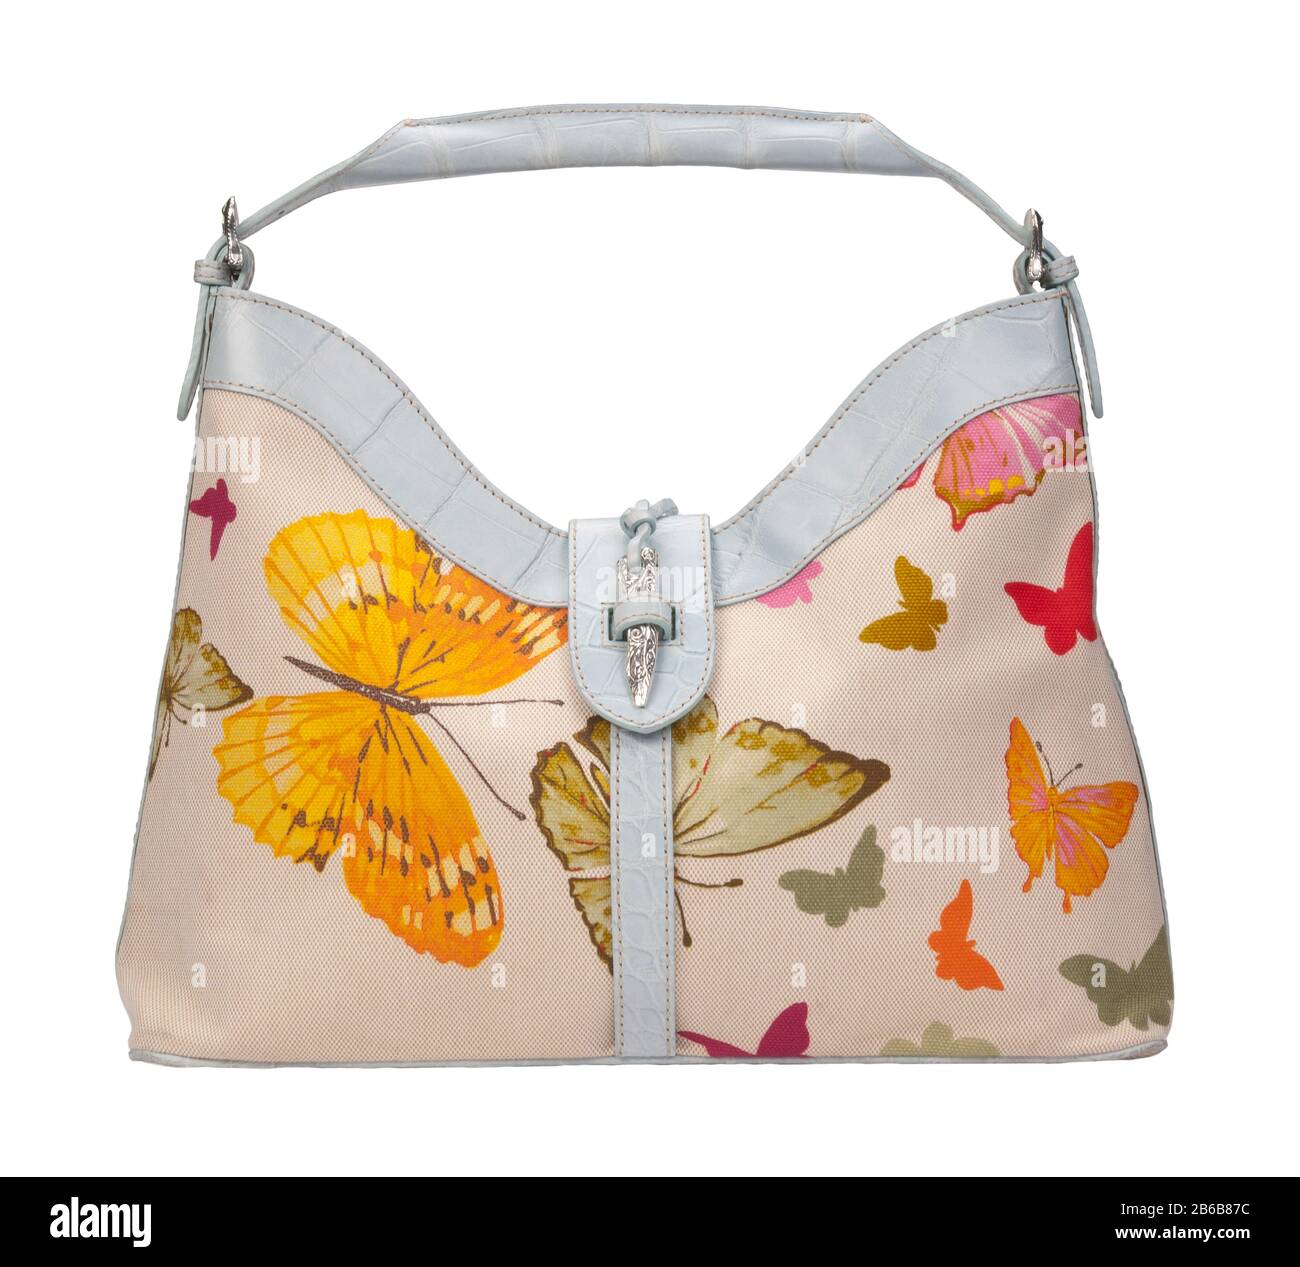 An elegant woman's handbag with light blue leather handle and canvas  printed with a butterfly design Stock Photo - Alamy